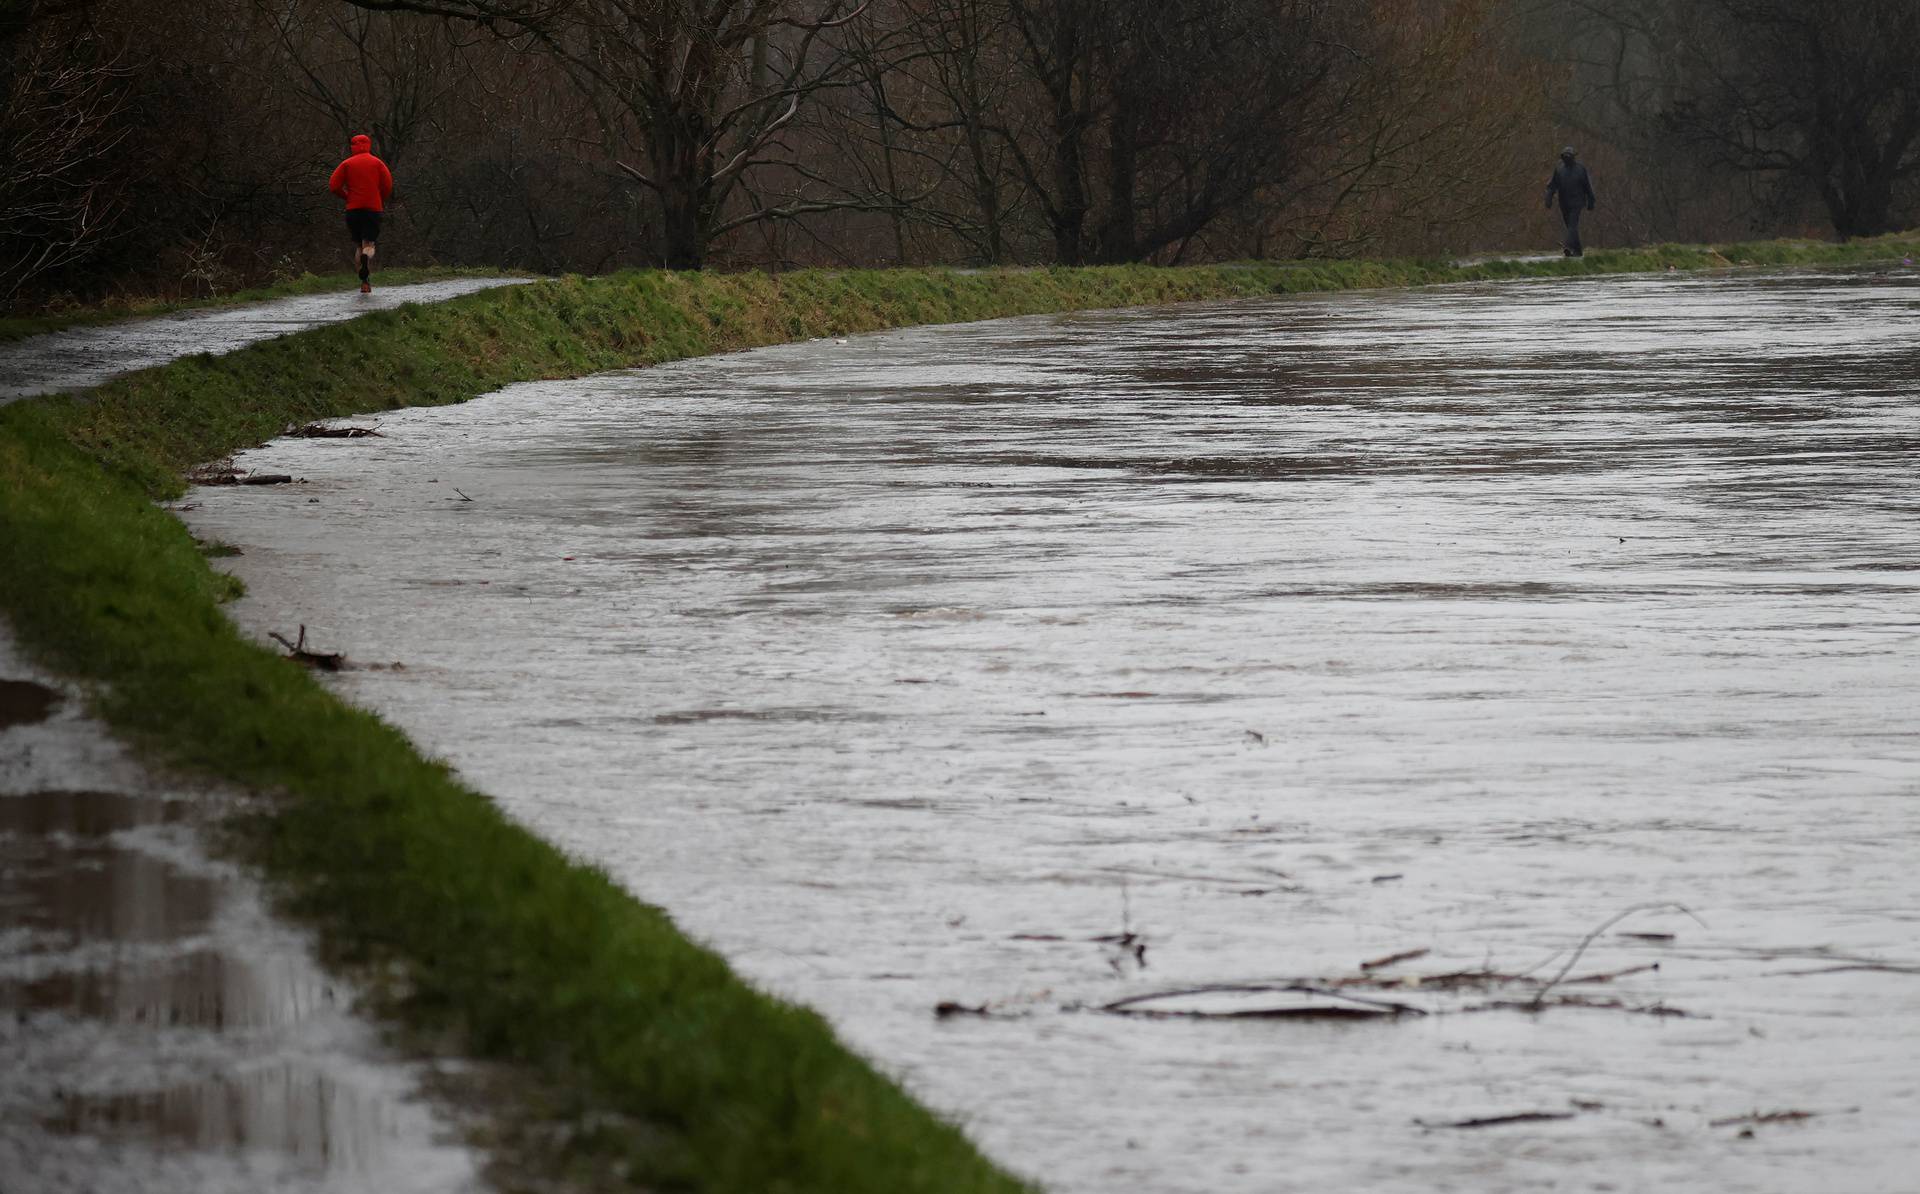 People exercise along the banks of a heavily flooded River Mersey as Storm Christoph arrives in Manchester